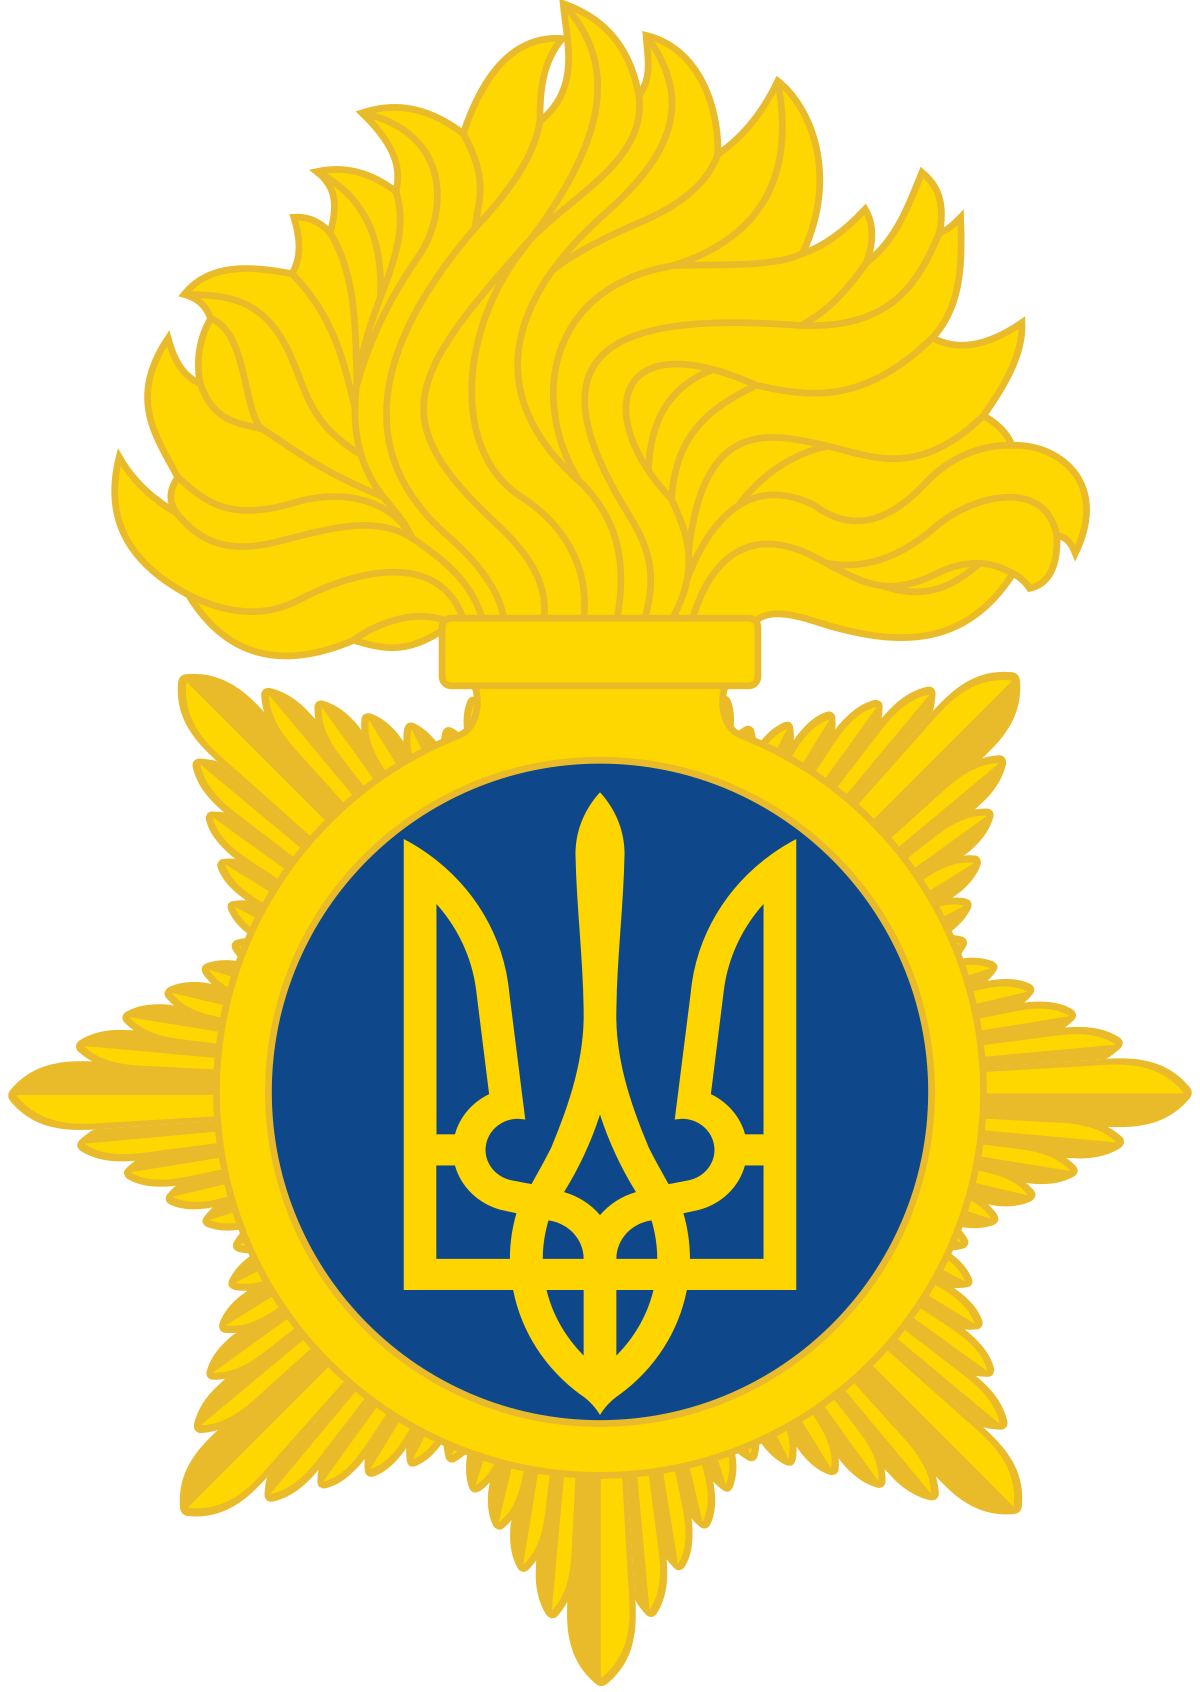 Red with Yellow Banner 1783 Logo - National Guard of Ukraine